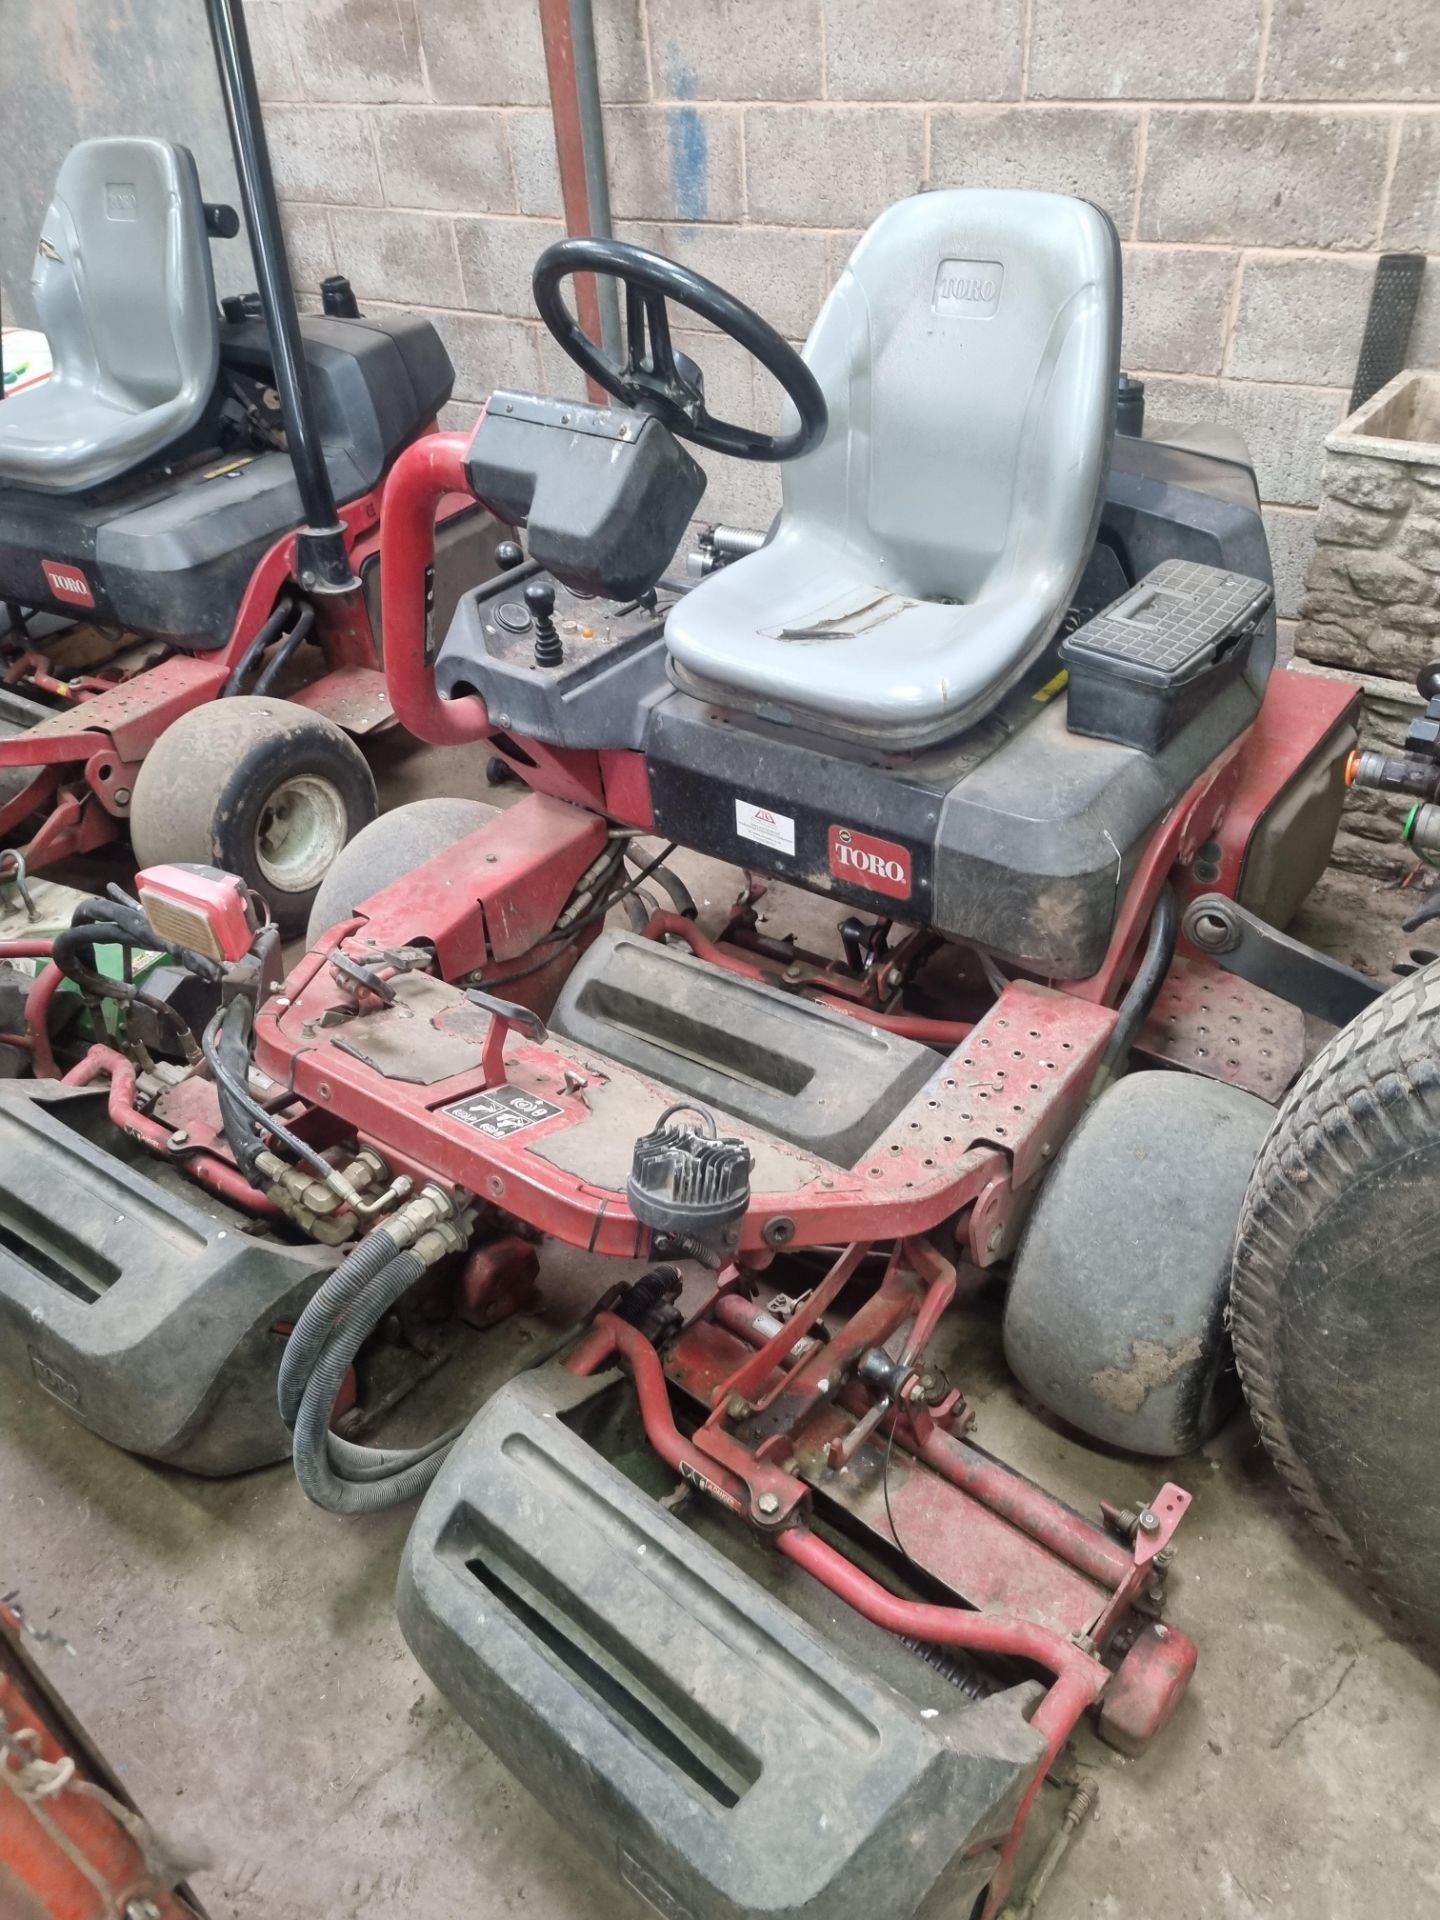 Toro Greensmaster 3250 Mower Features Briggs & Stratton 24.8hp (18.5kW) engine Cutting width of - Image 10 of 10